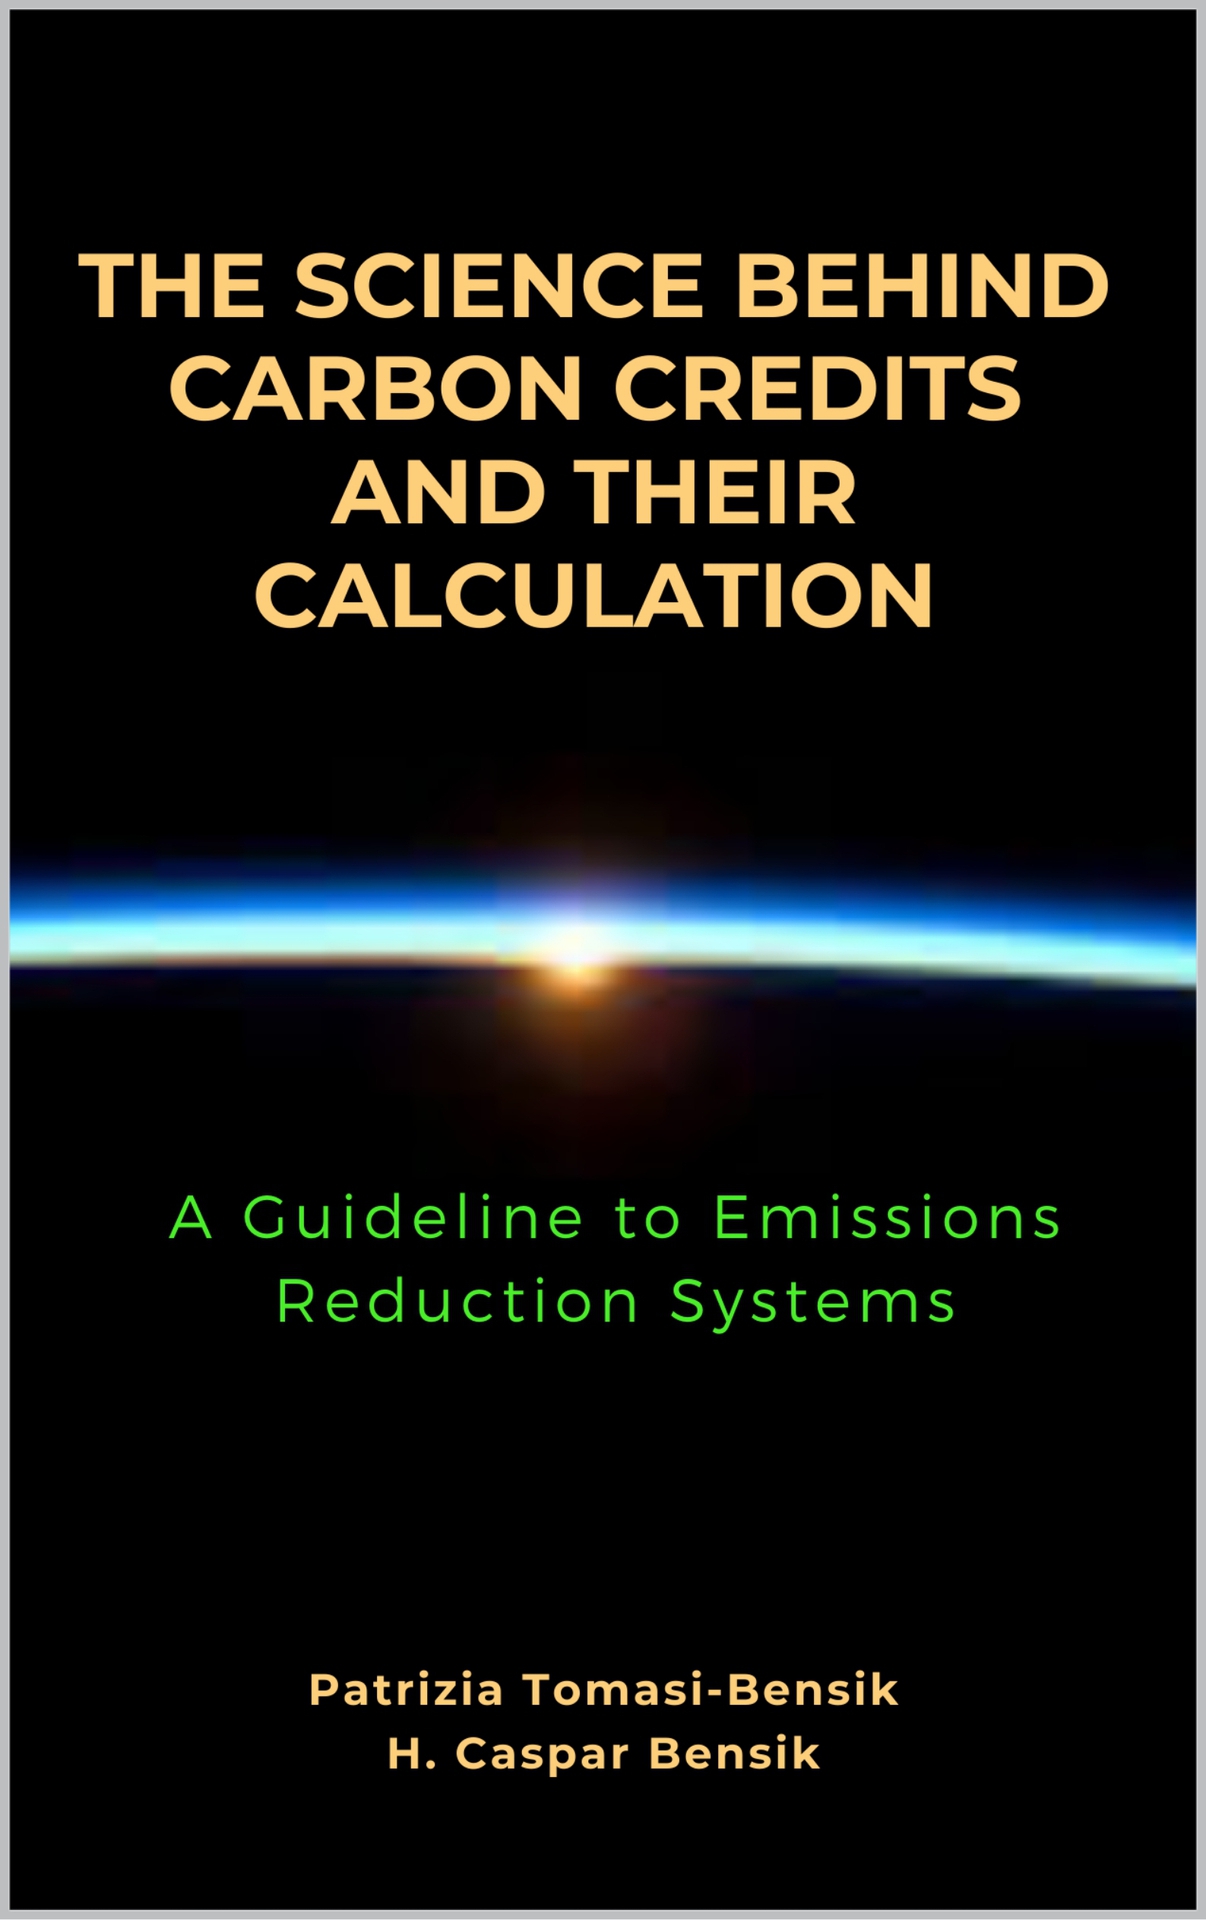 The Science Behind Carbon Credits and their Calculation